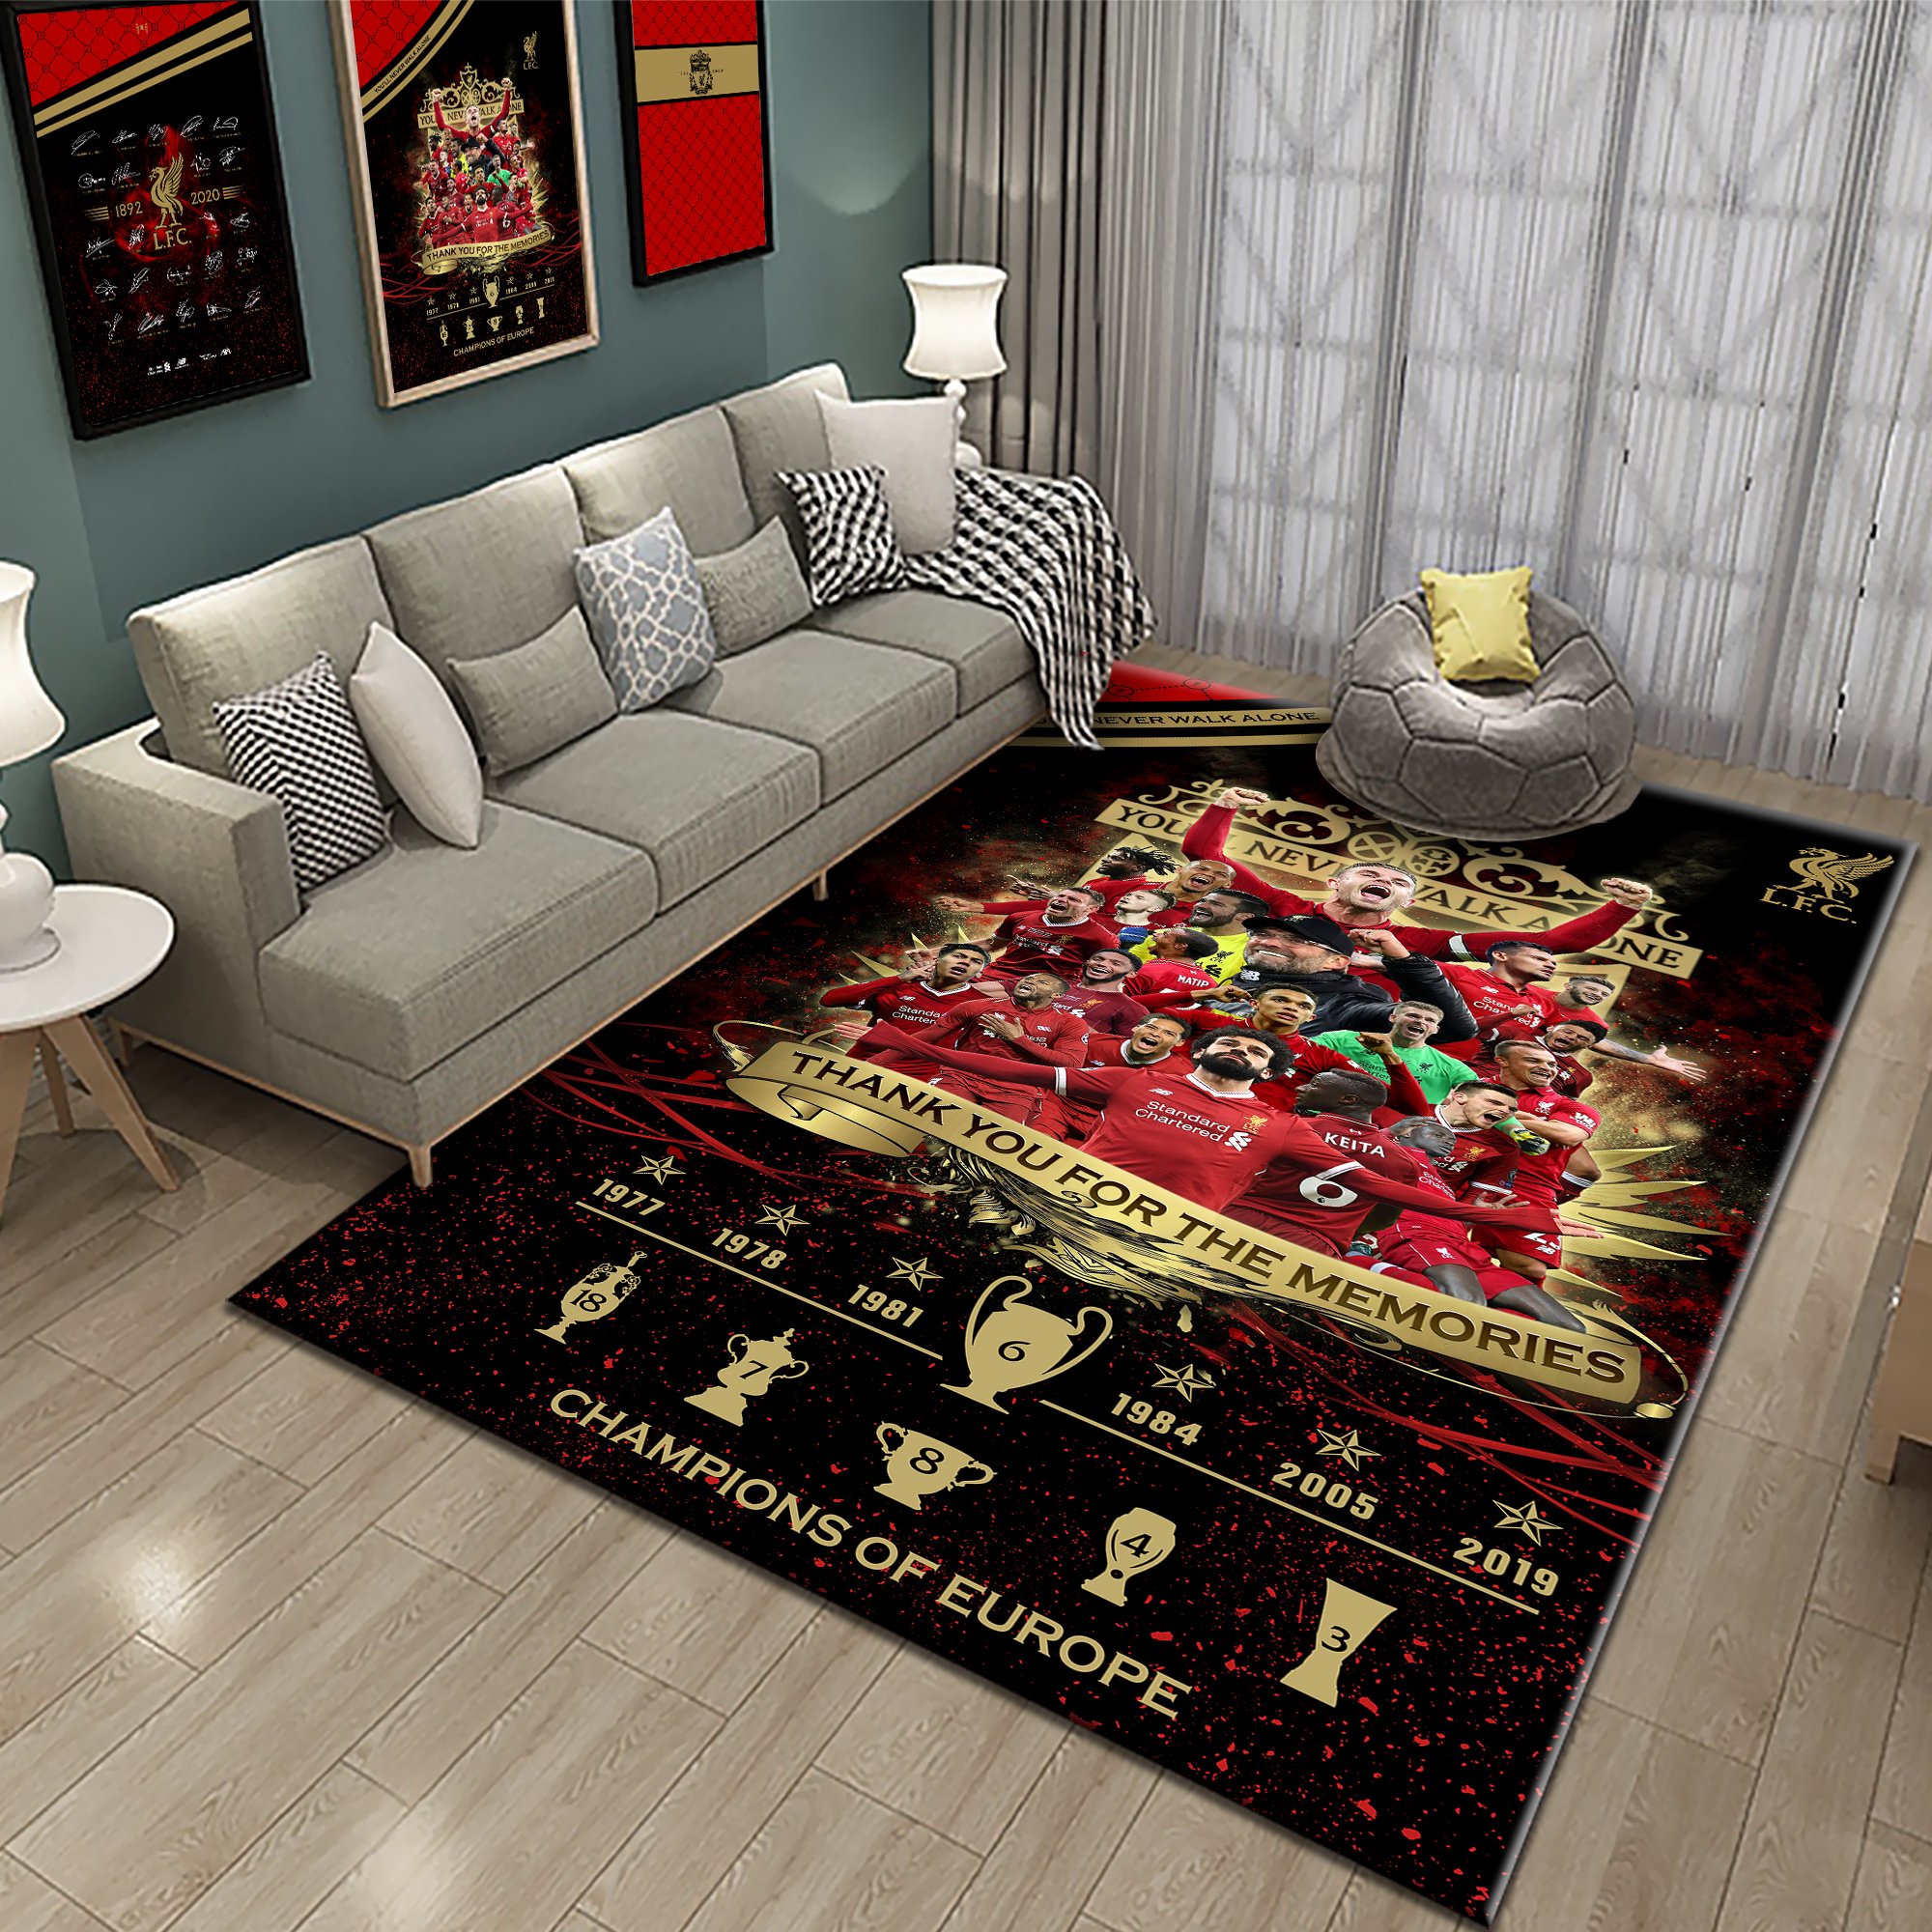 Xiaokang Carpet Liverpool Fans,Sports Theme Liverpool Living Dining Room Carpet Area Rug,A,60 90cm 